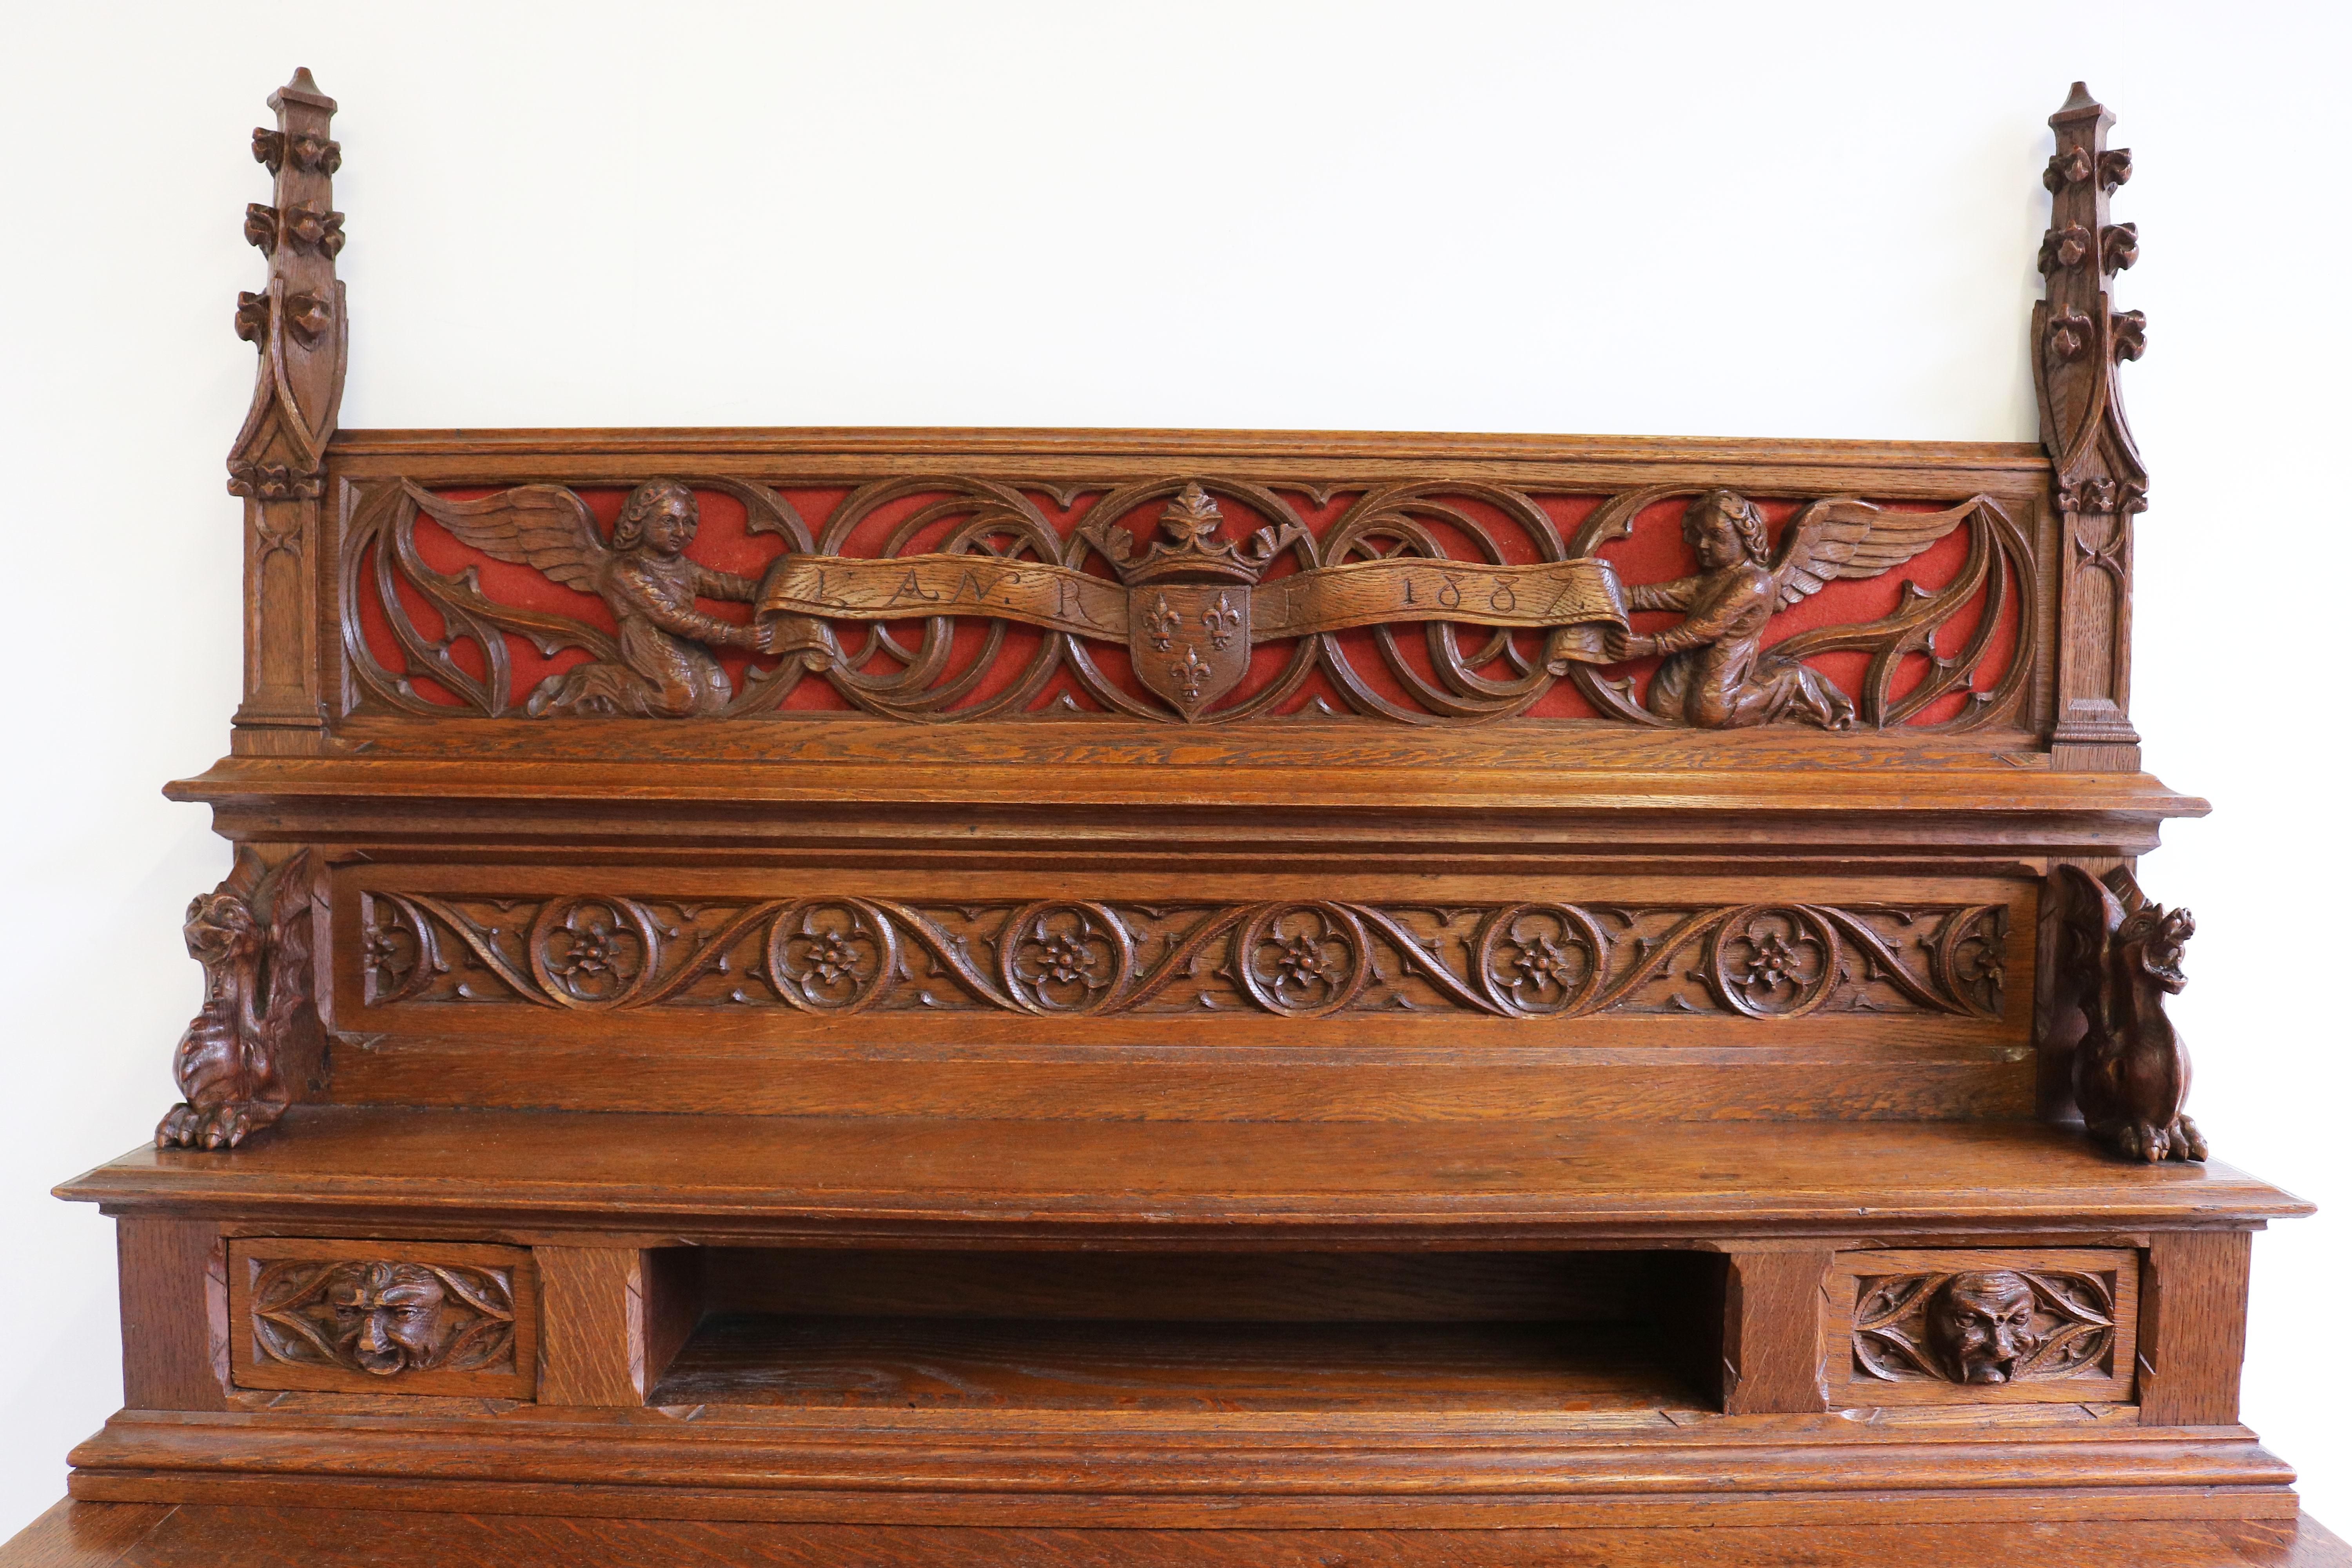 Hand-Carved Rare Gothic Revival Writing Desk Carved Oak Antique 19th Century Angels Dragons For Sale